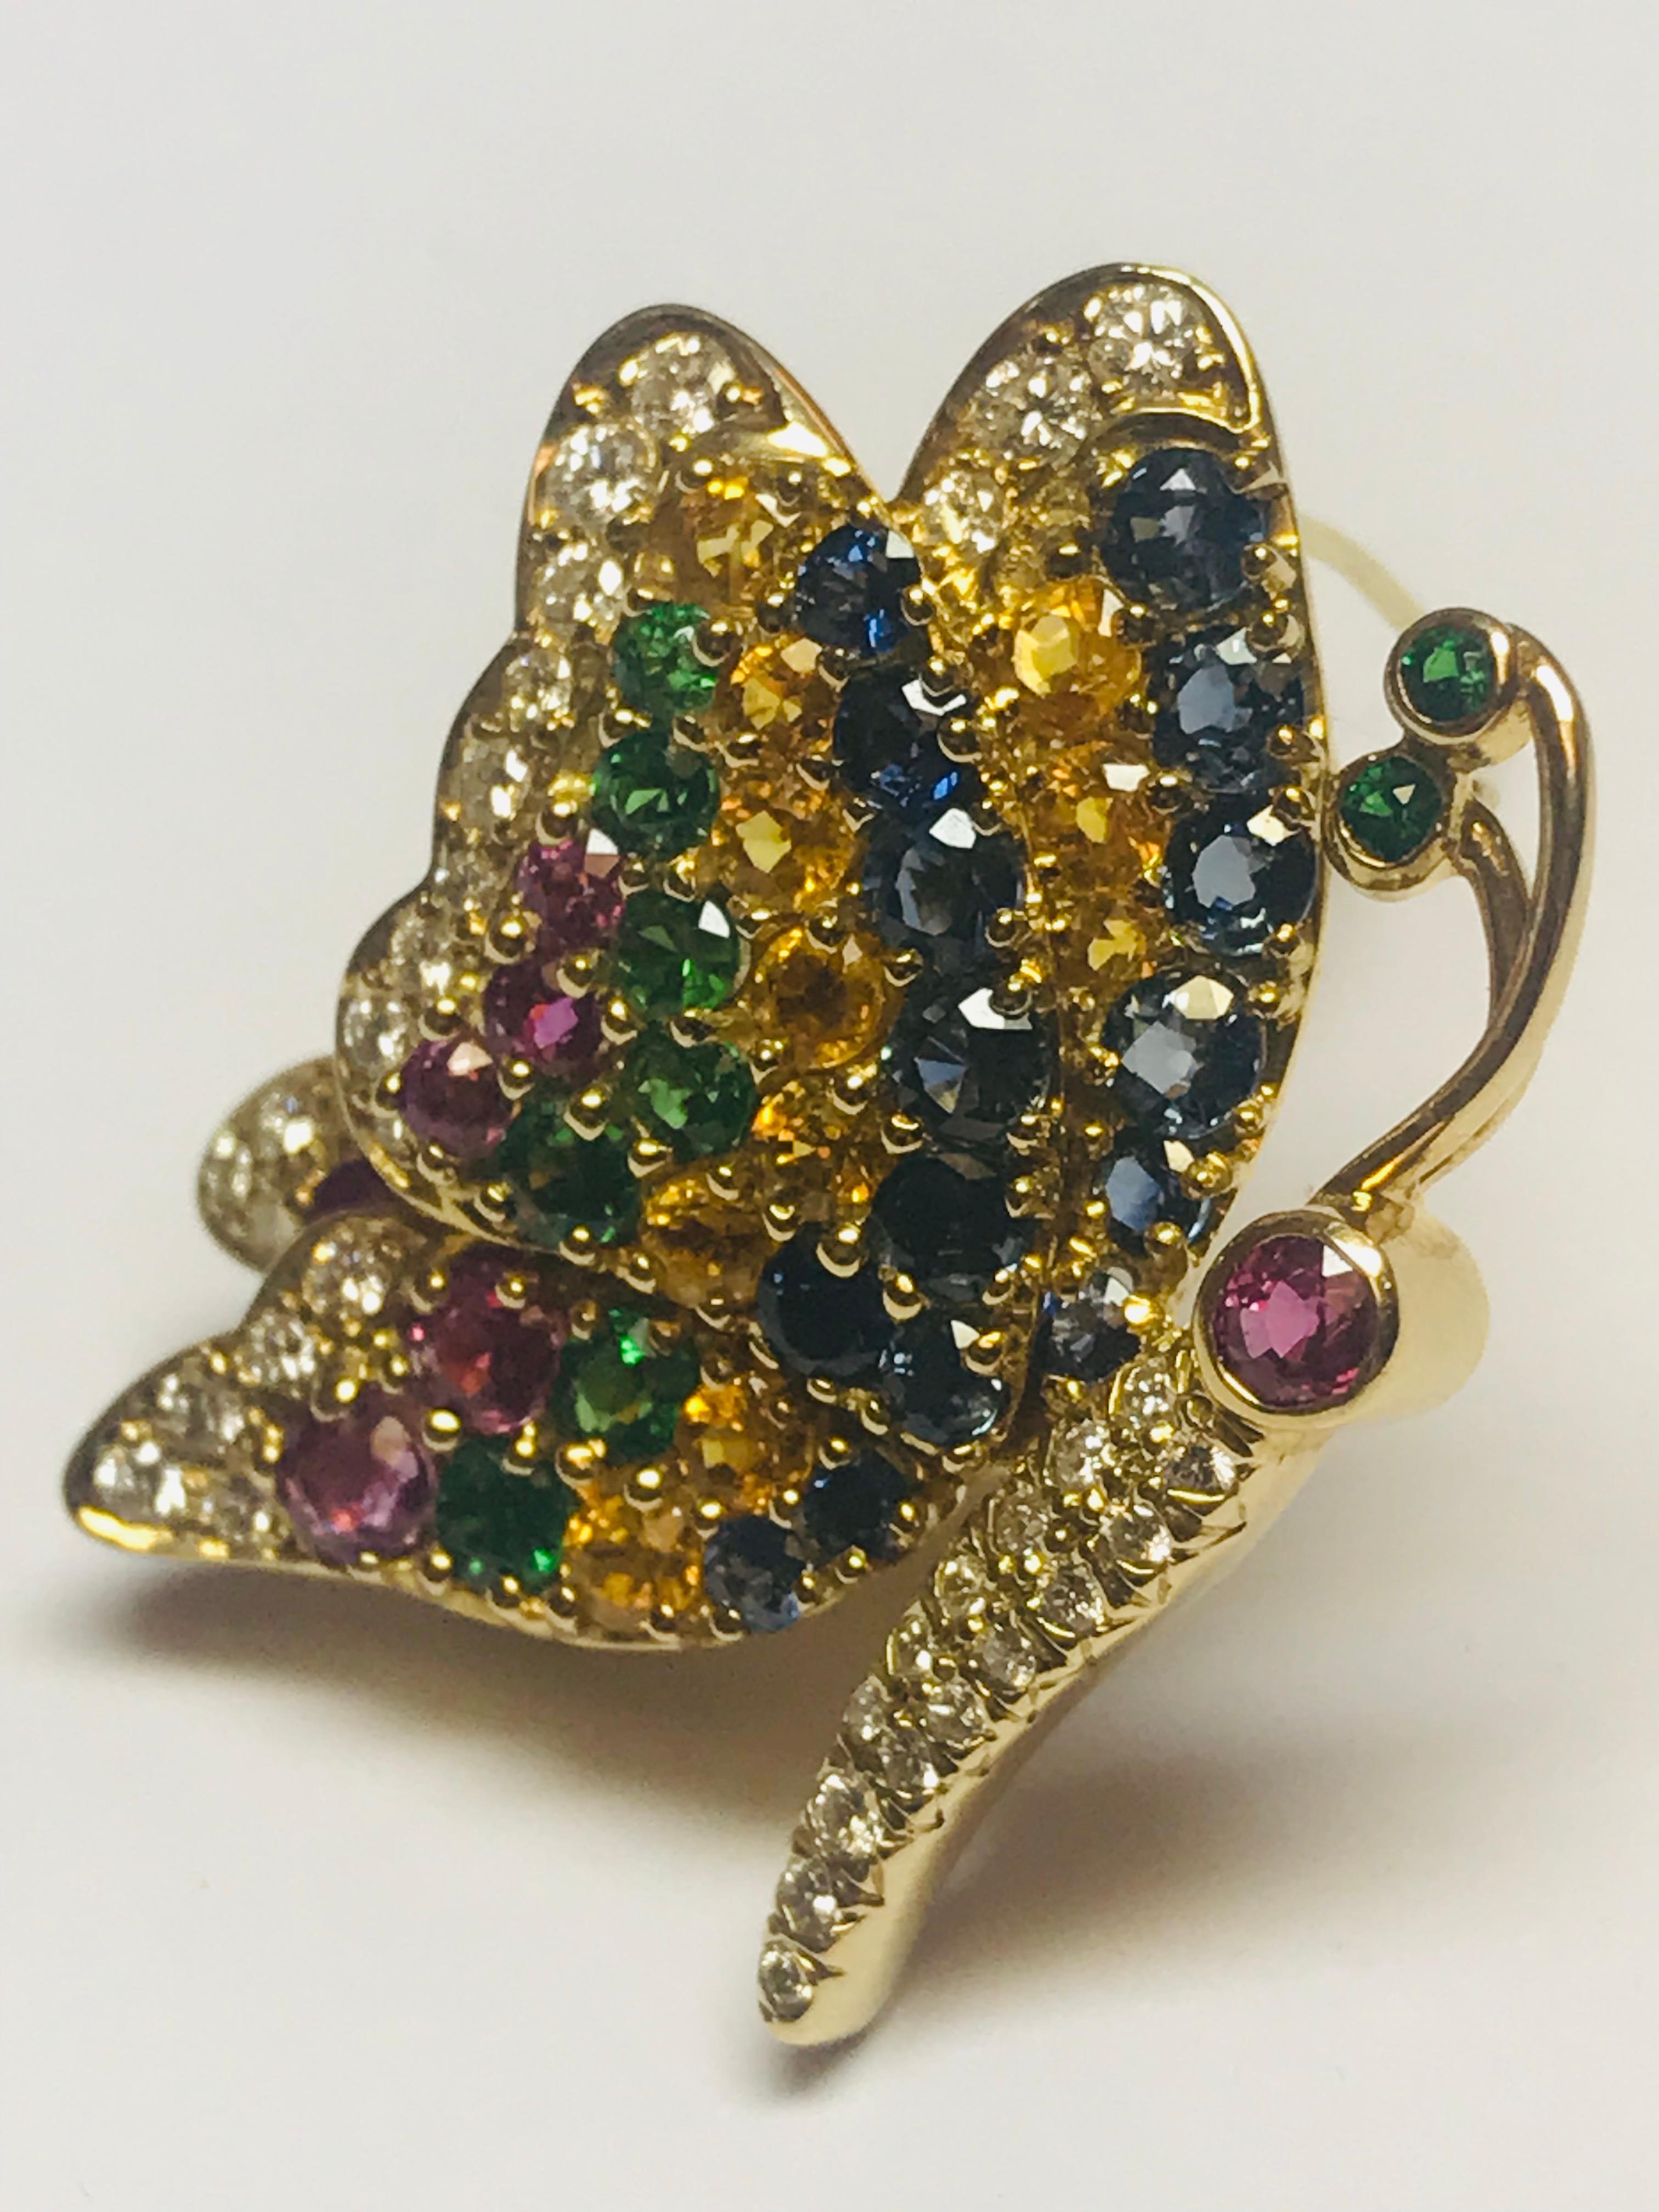 The combination of these 5 stones is perfectly designed, and created, by Jean Vitau to enhance the beauty of this profile butterfly pin. The multi colored piece has .67 carats of Diamonds, 1.80 carats of Blue Sapphires, 1.10 carats of Yellow